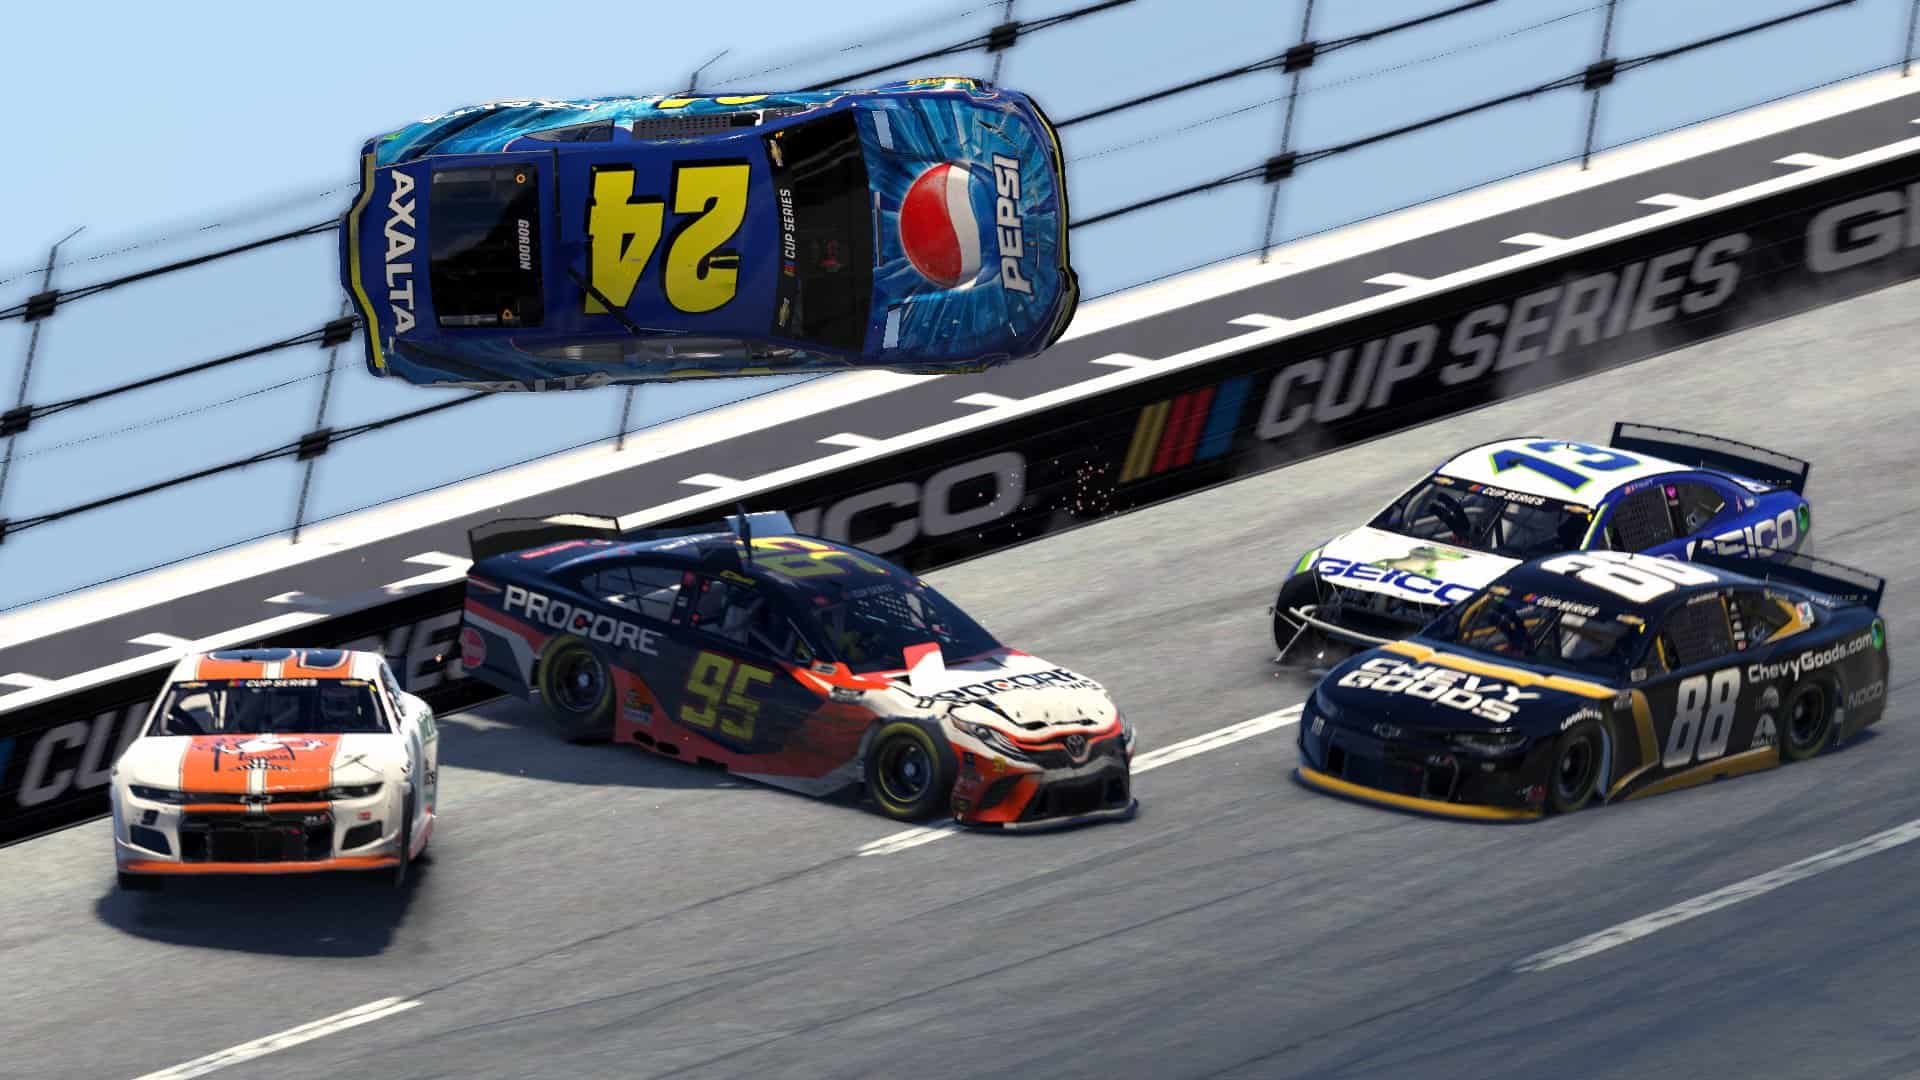 Retrospective: What was, what could have been with the eNASCAR Pro Invitational iRacing Series